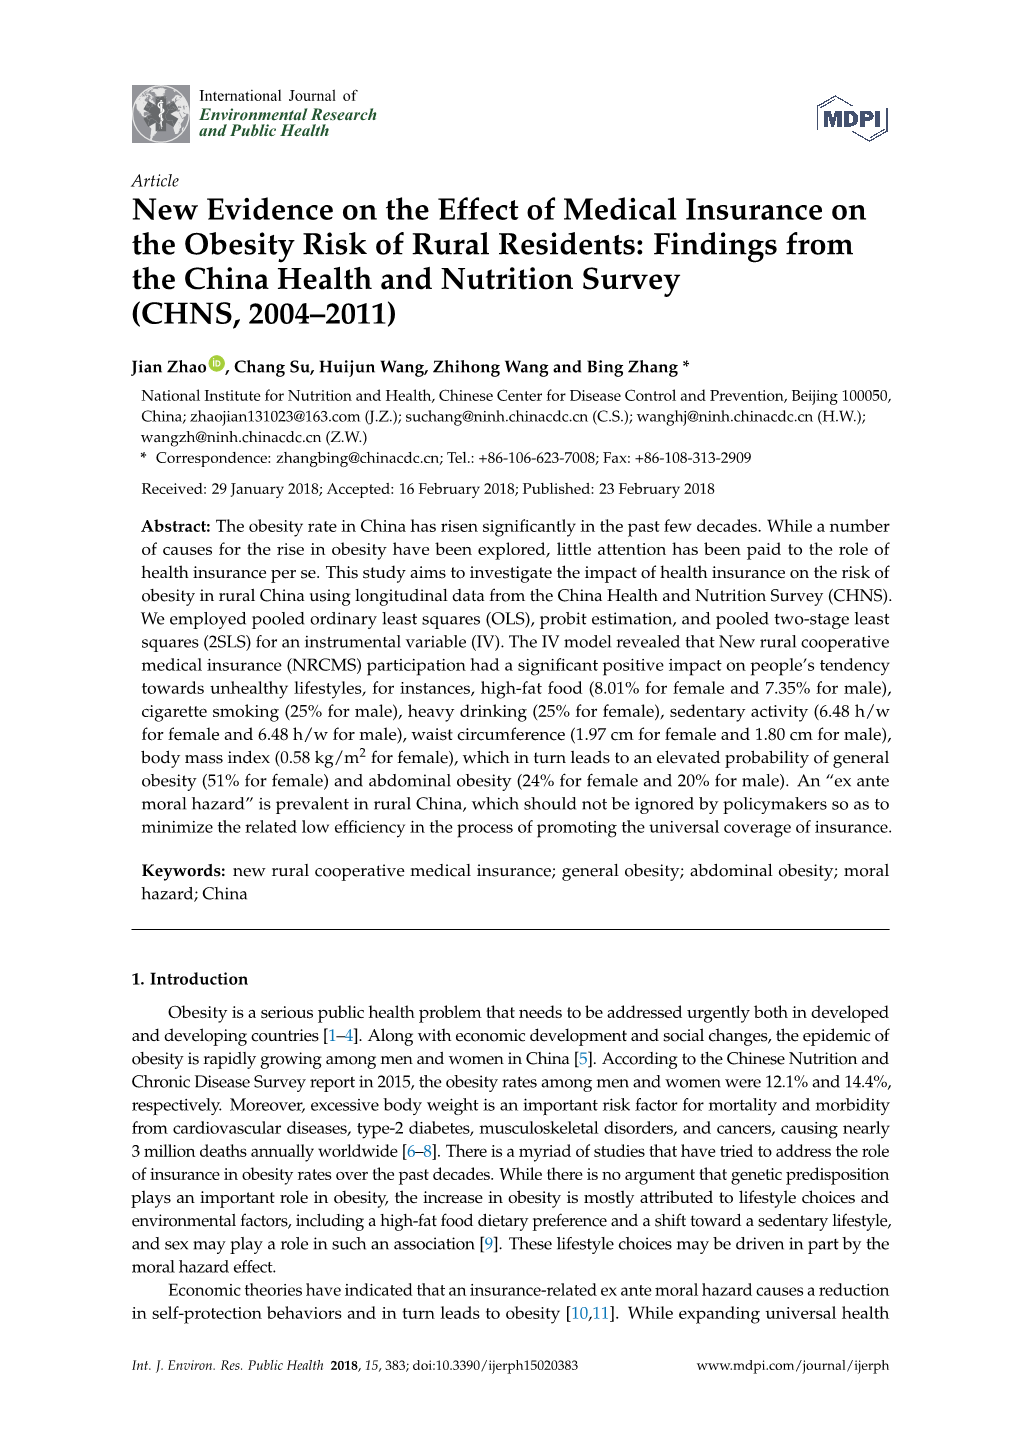 New Evidence on the Effect of Medical Insurance on the Obesity Risk of Rural Residents: Findings from the China Health and Nutrition Survey (CHNS, 2004–2011)